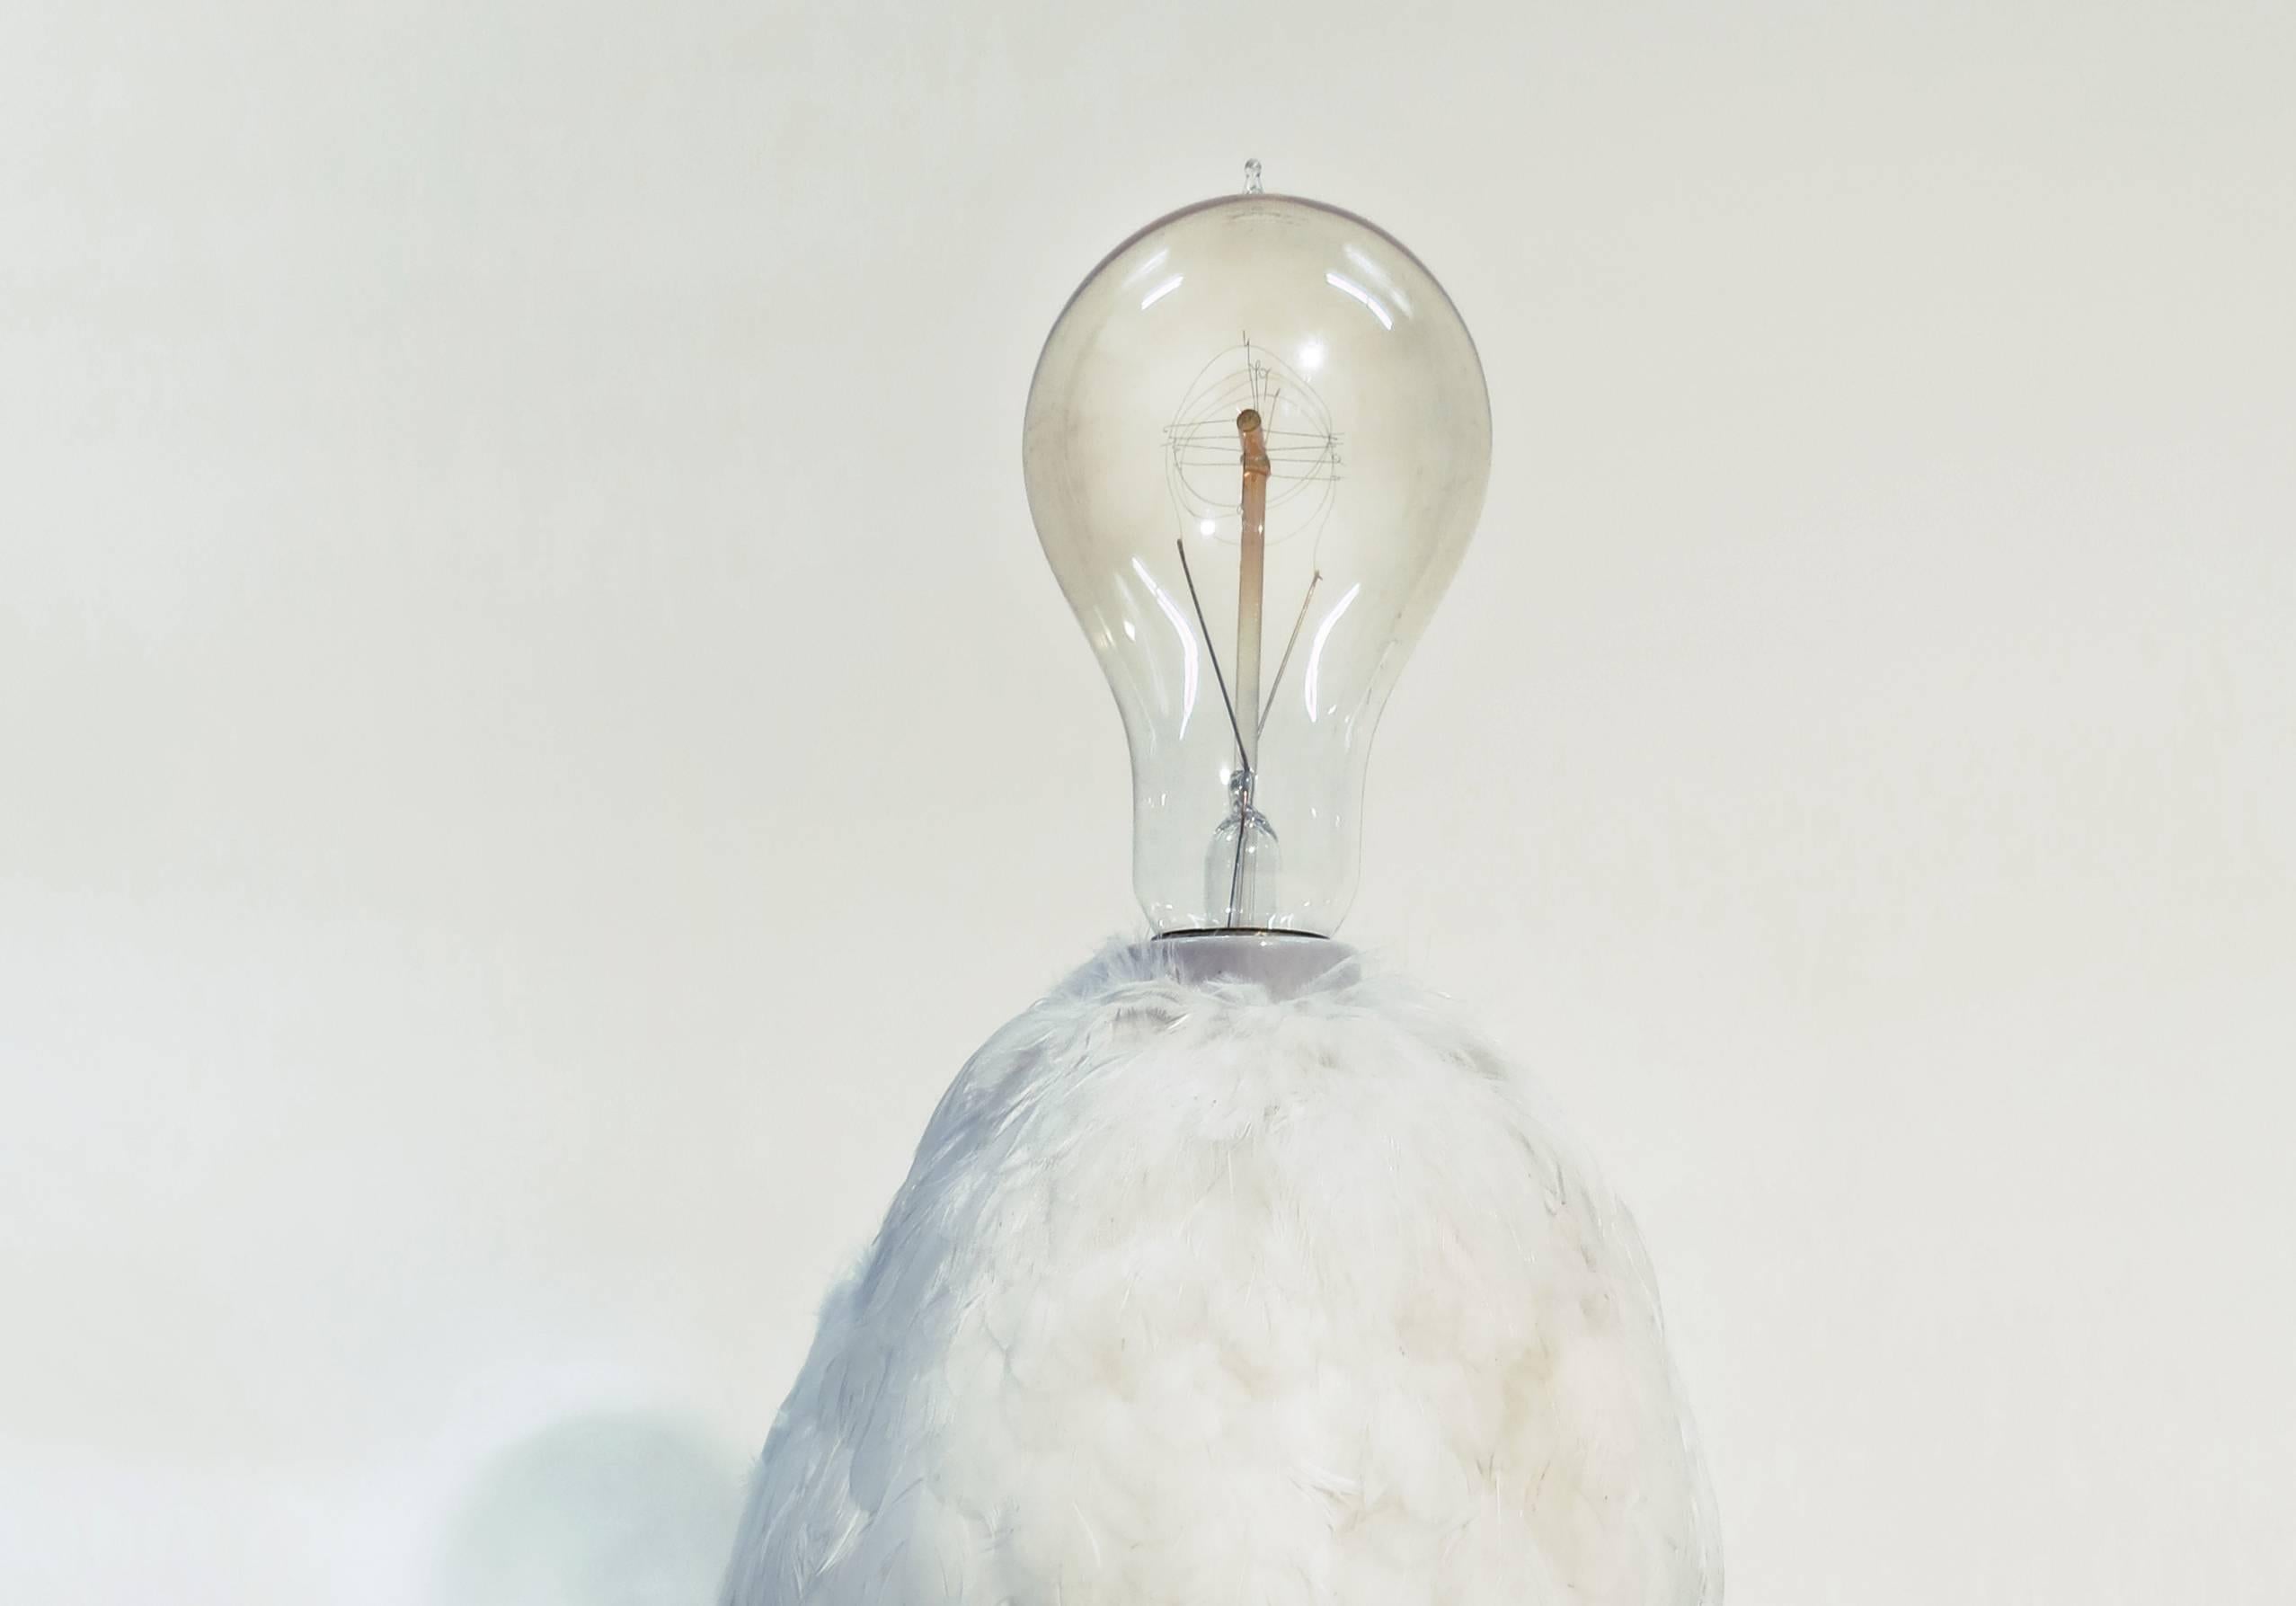 The chicken lamp continues Sebastian Errazuriz's series of functional sculptures with taxidermy. This piece is made of taxidermy chicken, electric components, a light bulb and plexiglass.

Chilean born, New York based artist and designer Sebastian